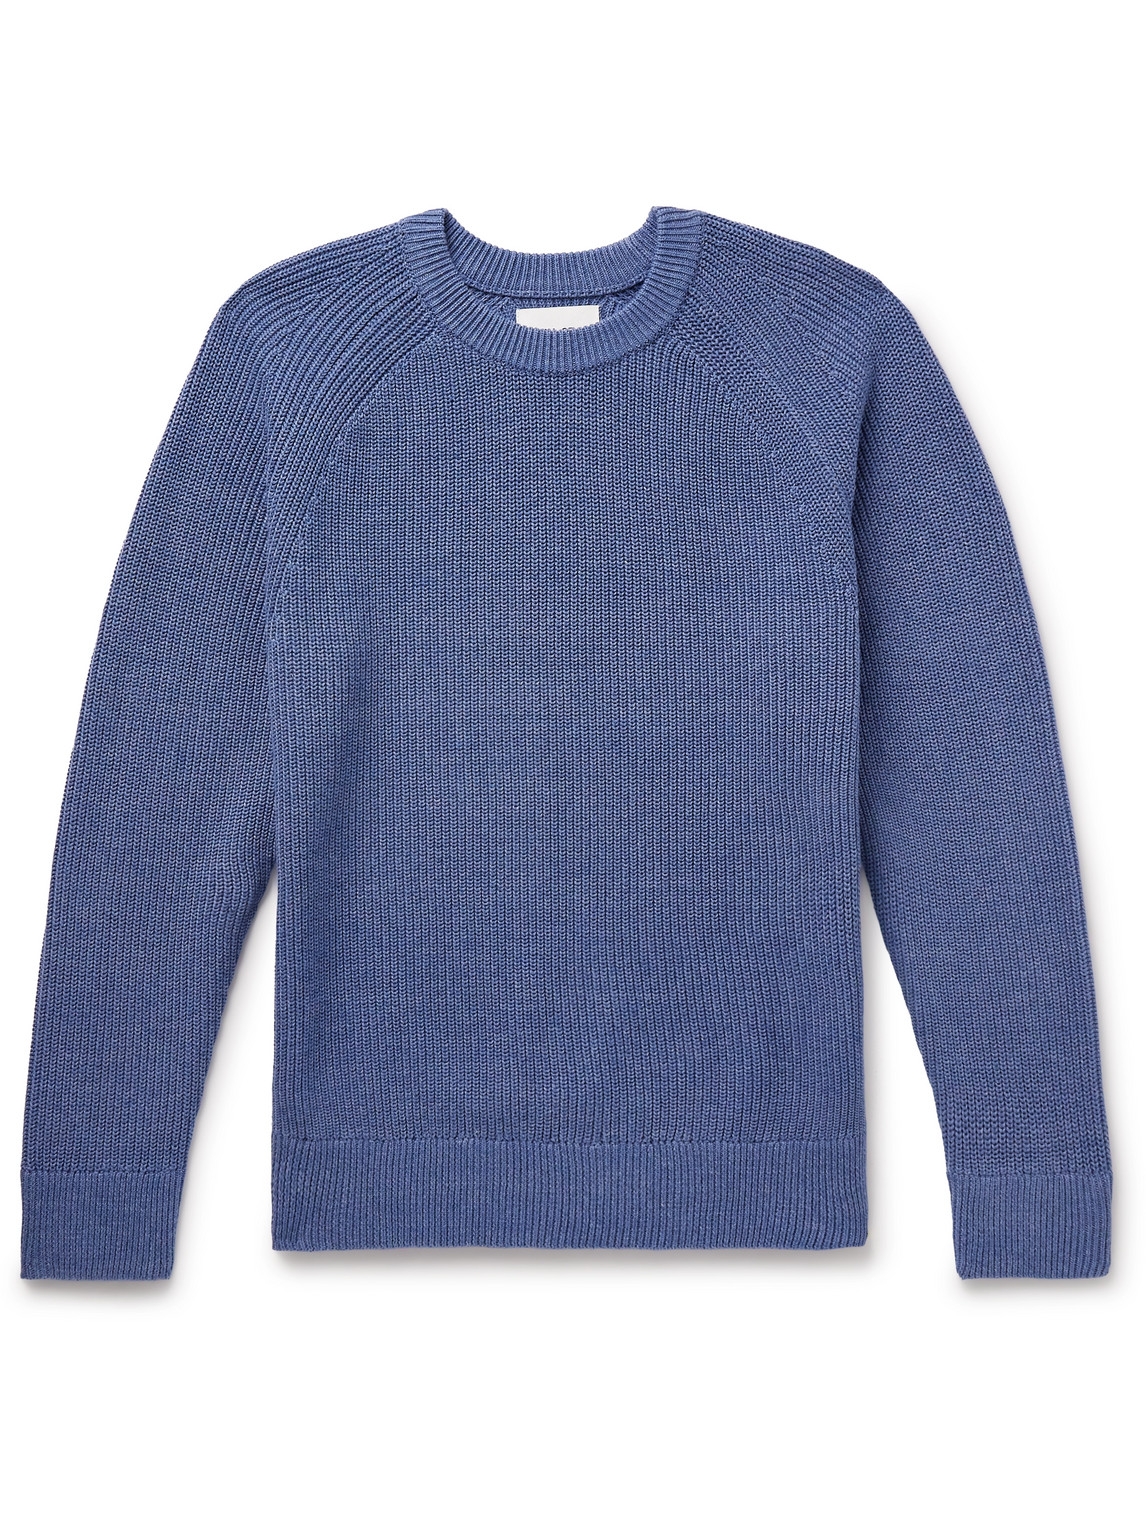 Nn07 Jacobo 6470 Ribbed Cotton Sweater In Blue